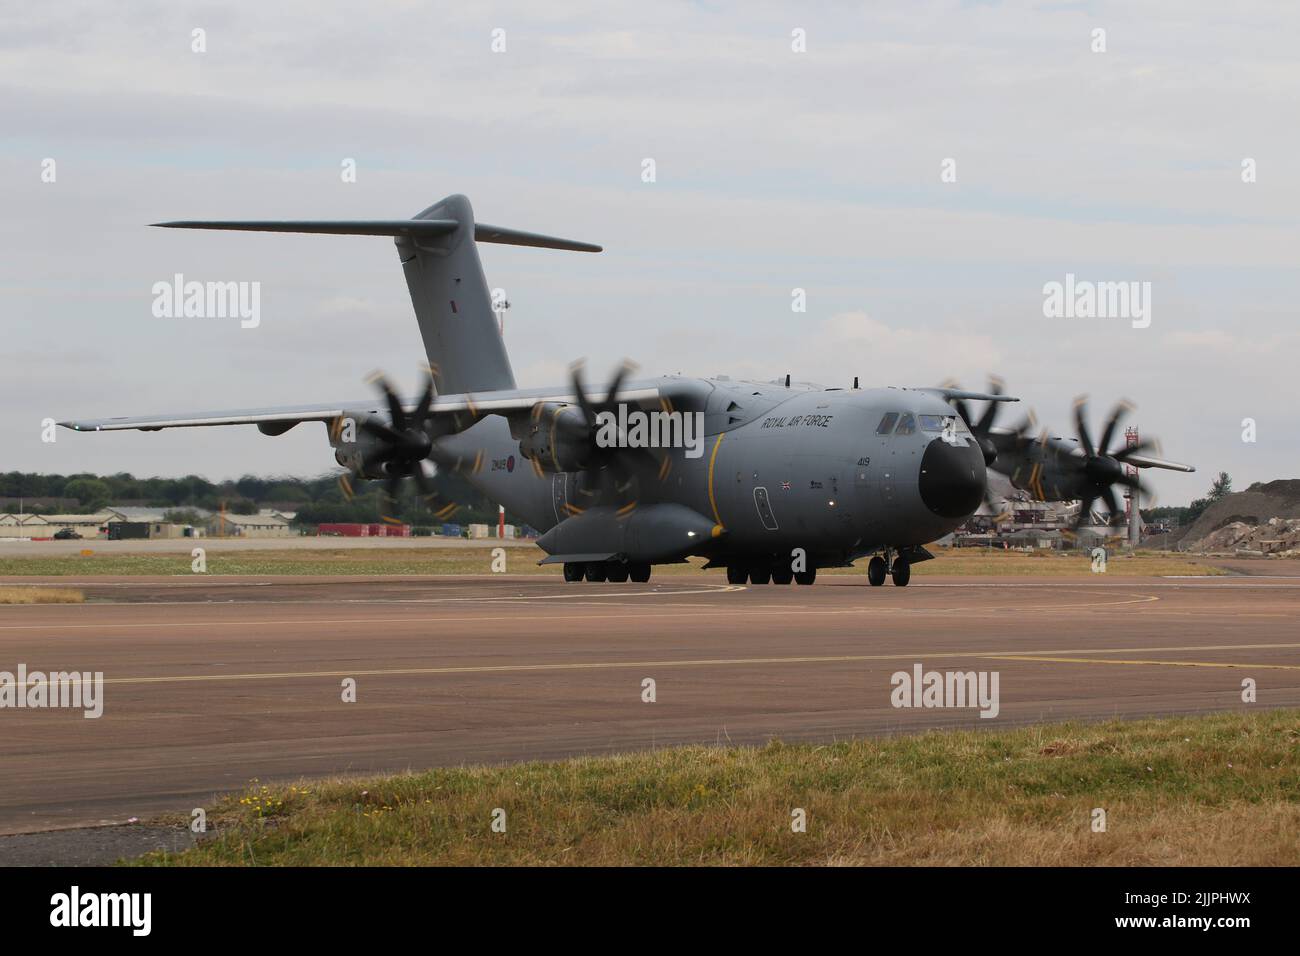 ZM419, an Airbus A400M Atlas C1 operated by the Royal Air Force, arriving at RAF Fairford in Gloucestershire, England, to participate in the Royal International Air Tattoo (RIAT) 2022. Stock Photo